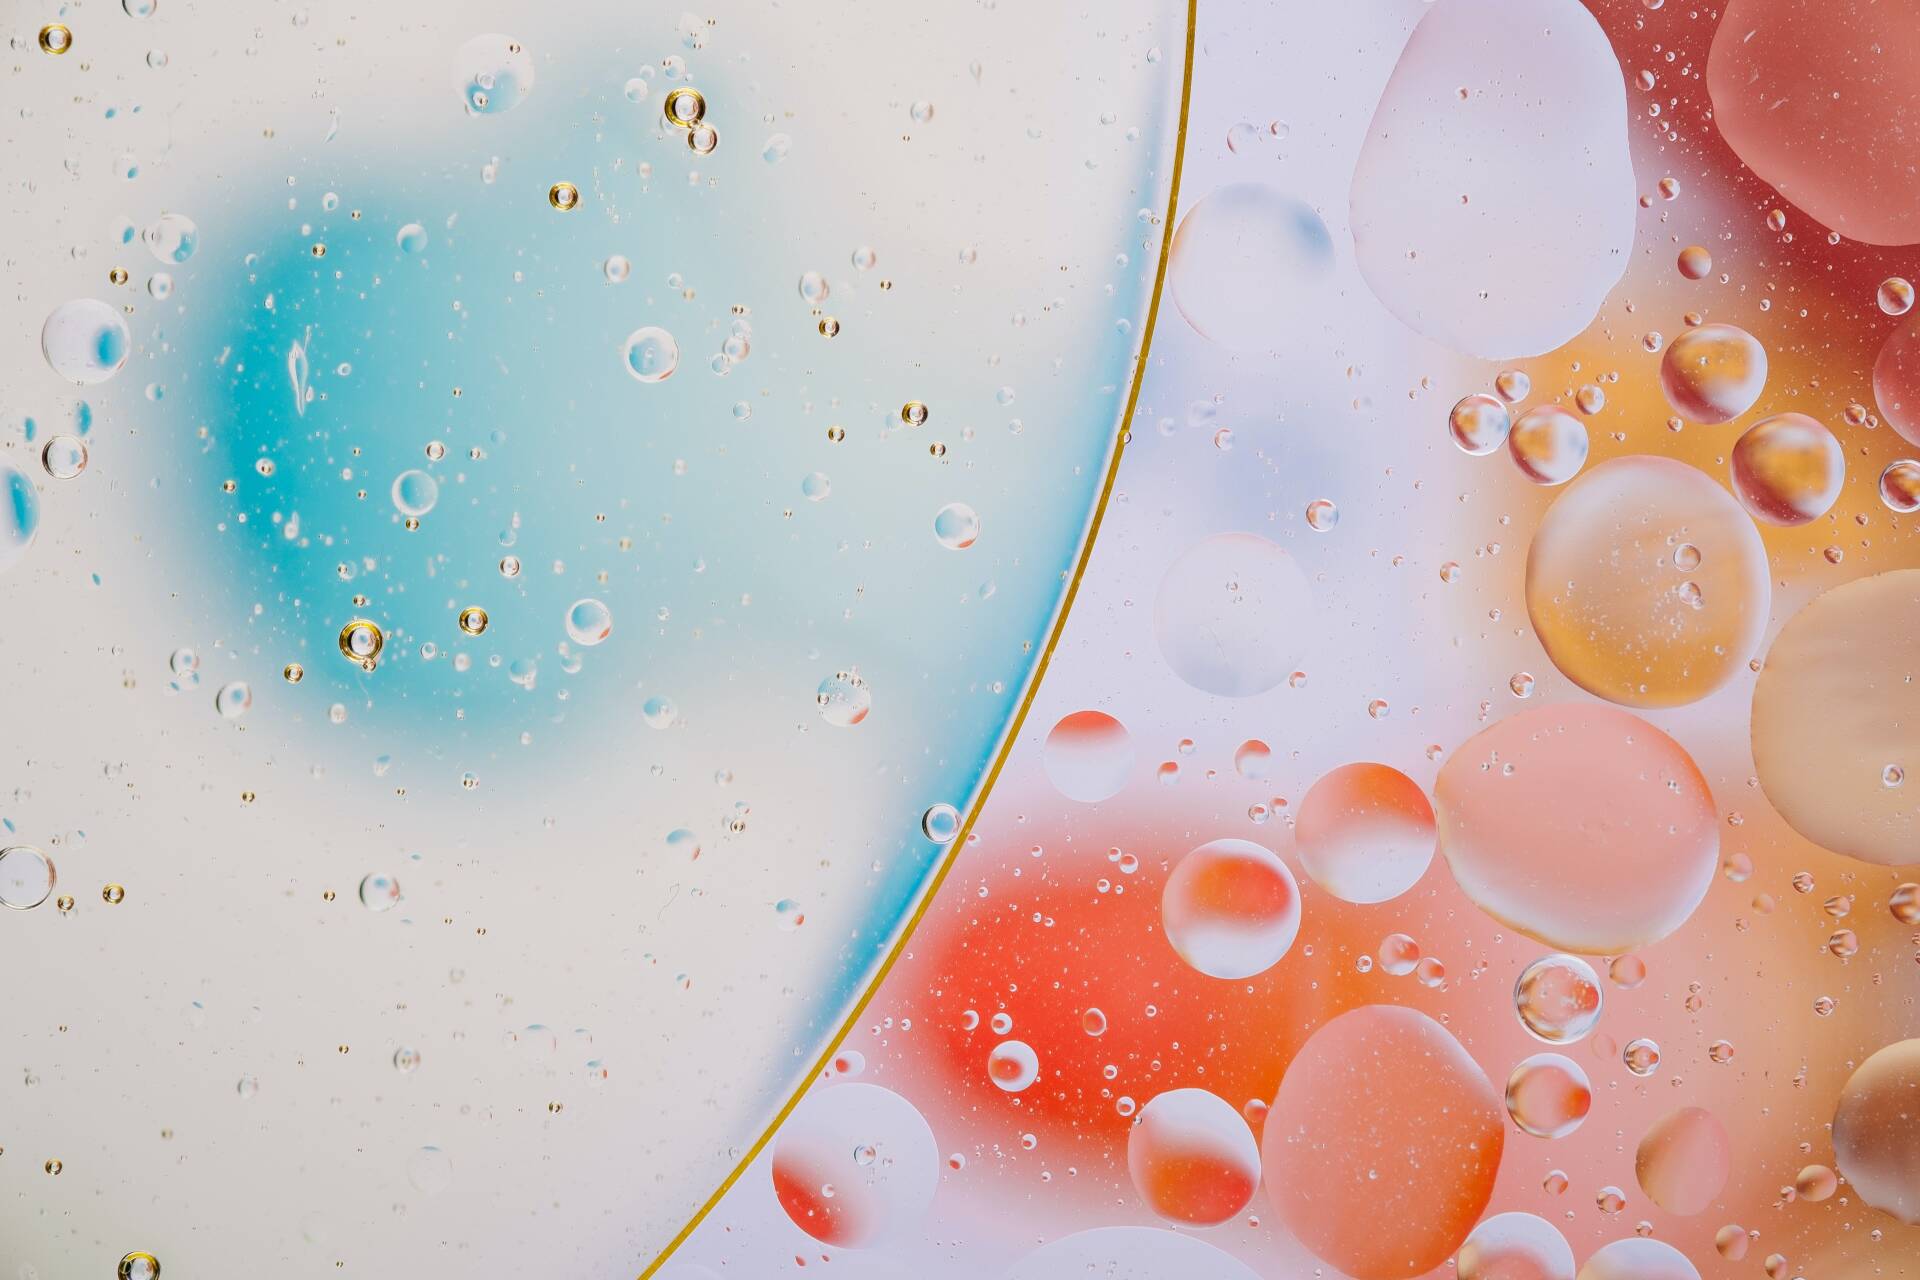 Gas bubbles in different colours